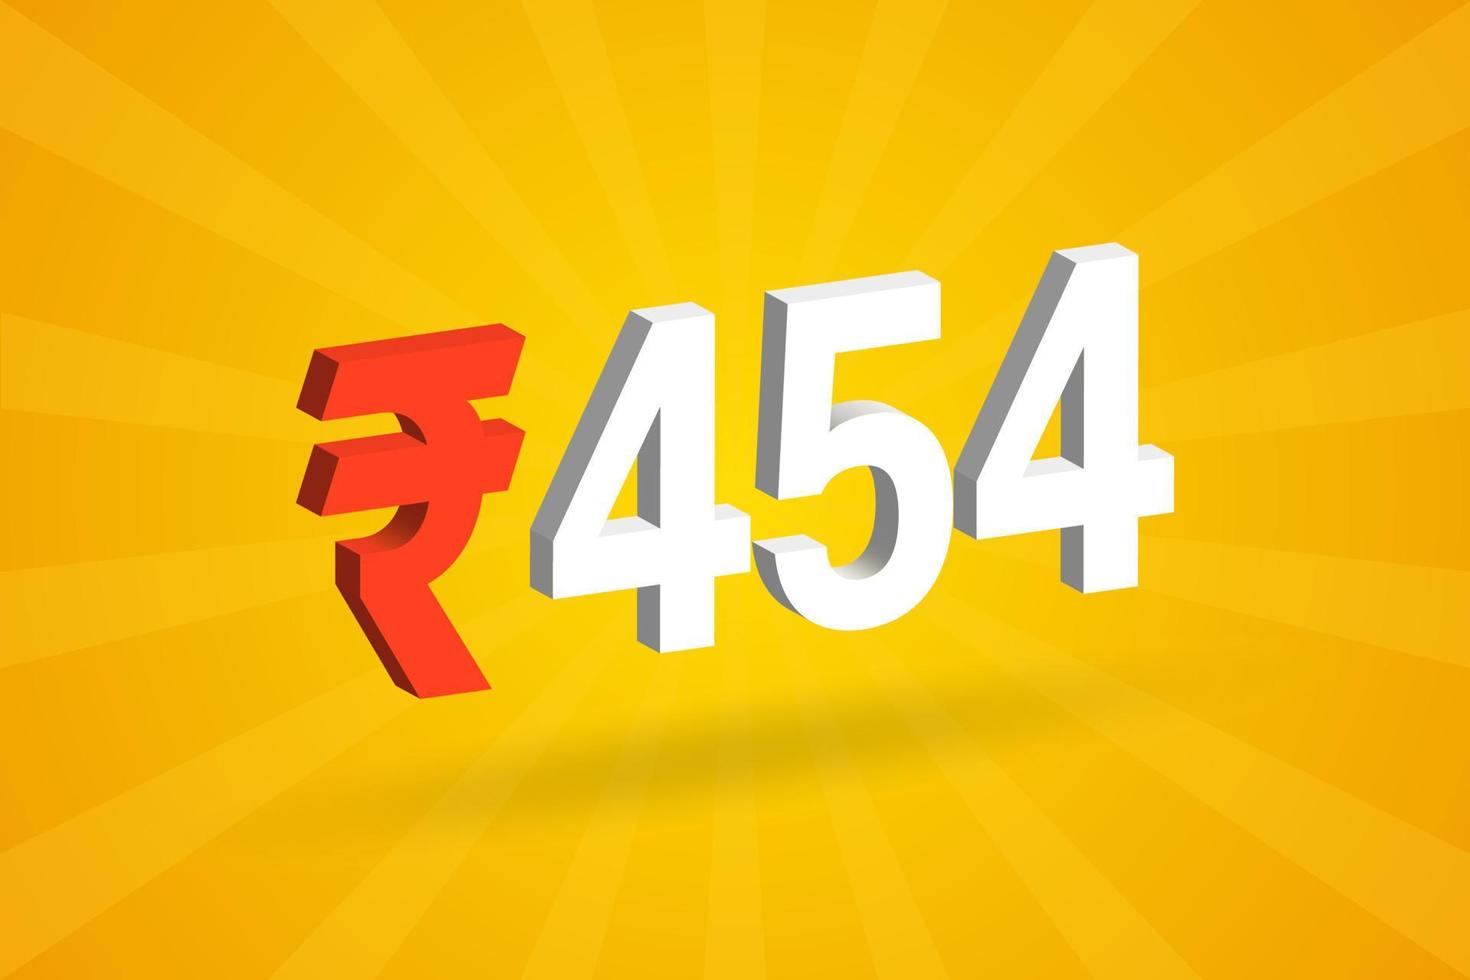 454 Rupee 3D symbol bold text vector image. 3D 454 Indian Rupee currency sign vector illustration